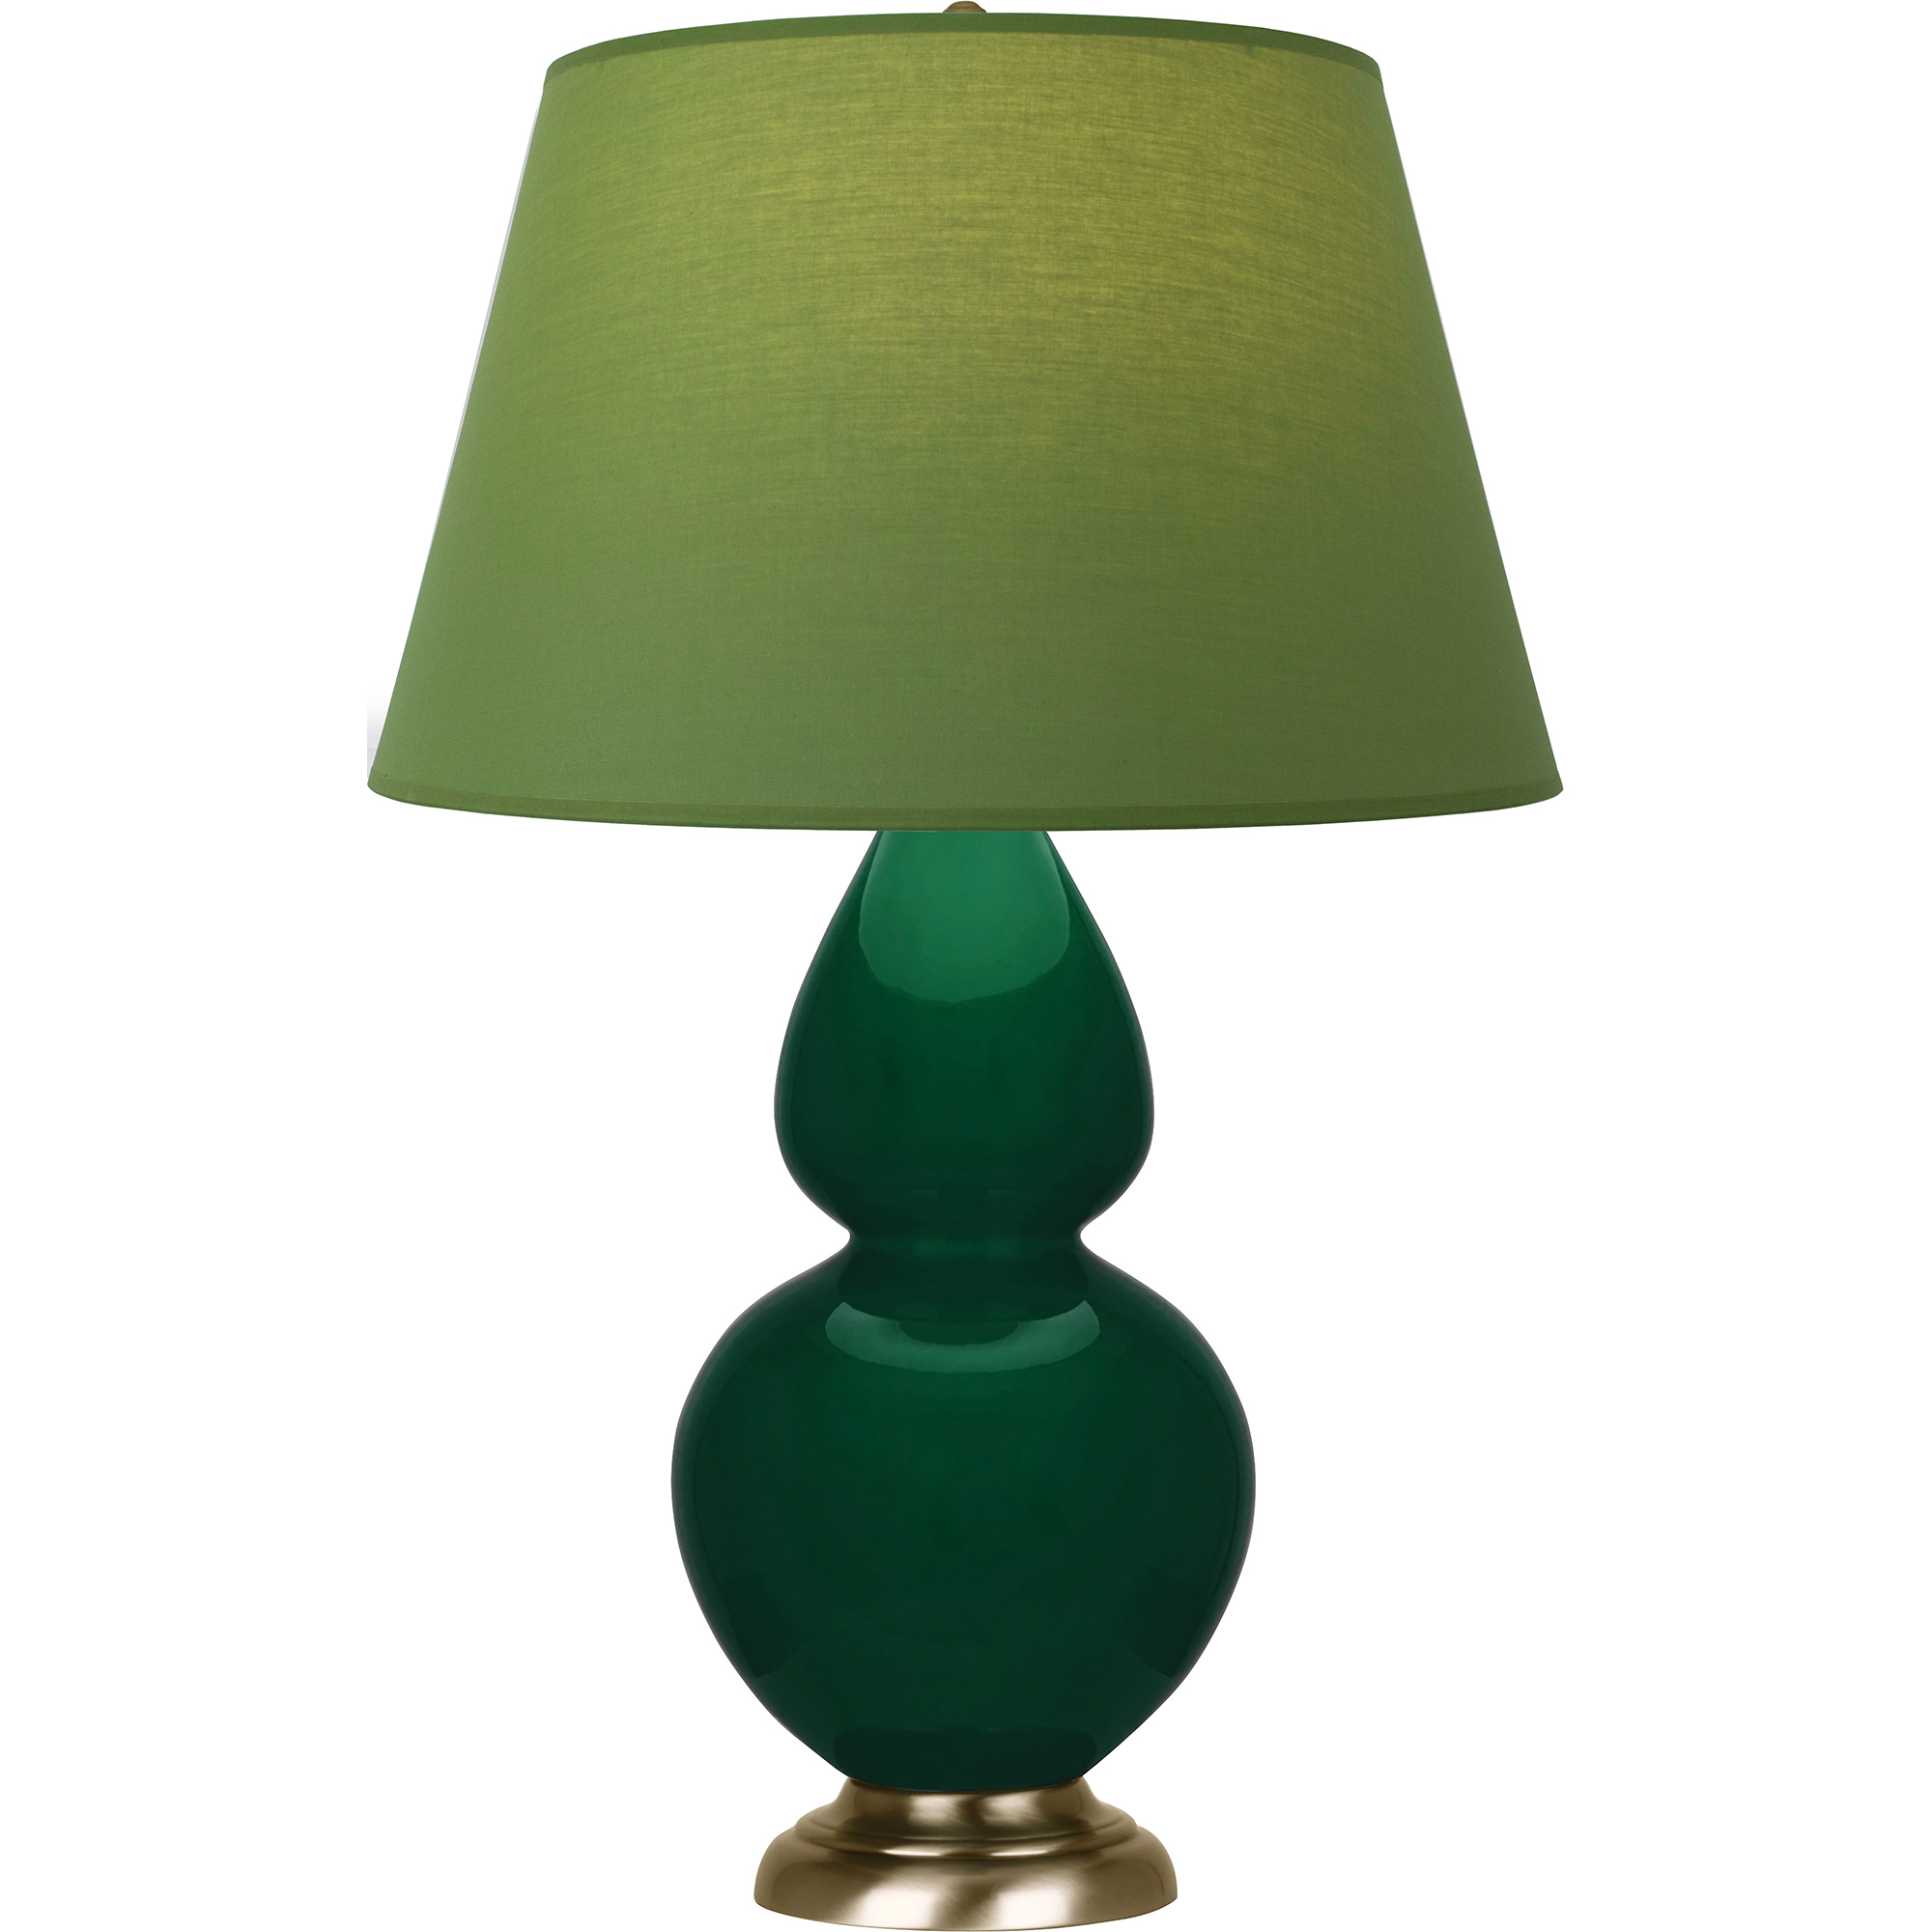 Double Gourd Table Lamp Style #JU20G